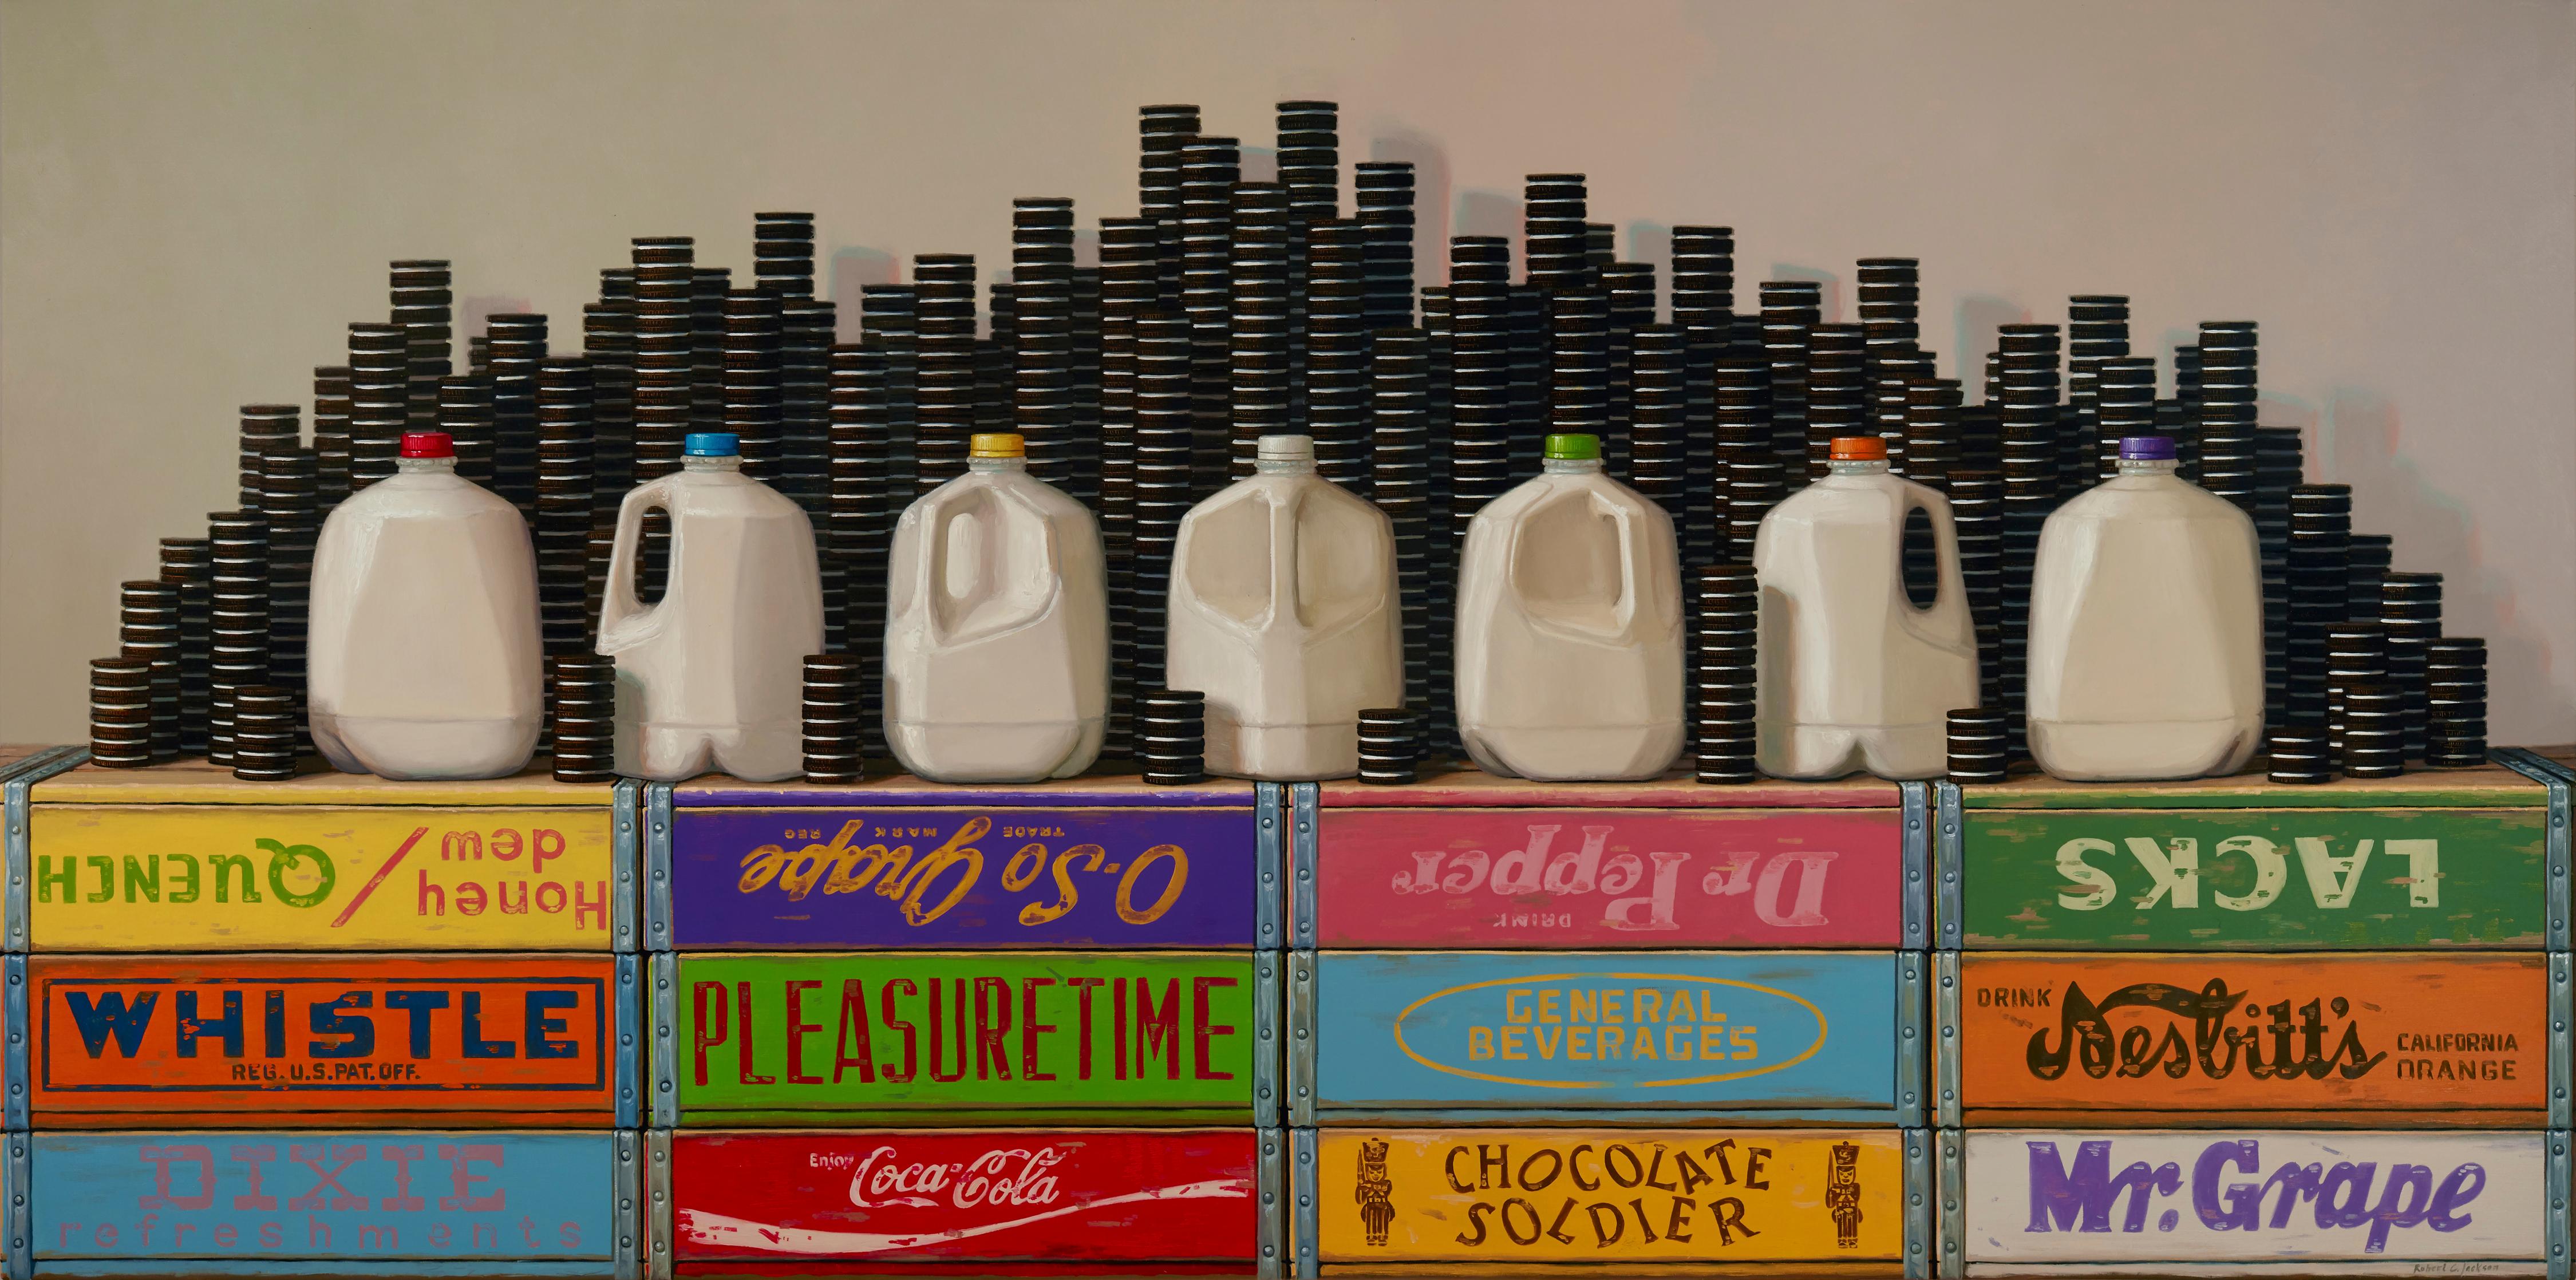 Robert Jackson Figurative Painting - Phases of The Milk, Contemporary Realist Painting, Oreos, Cookies, Trompe l'oeil